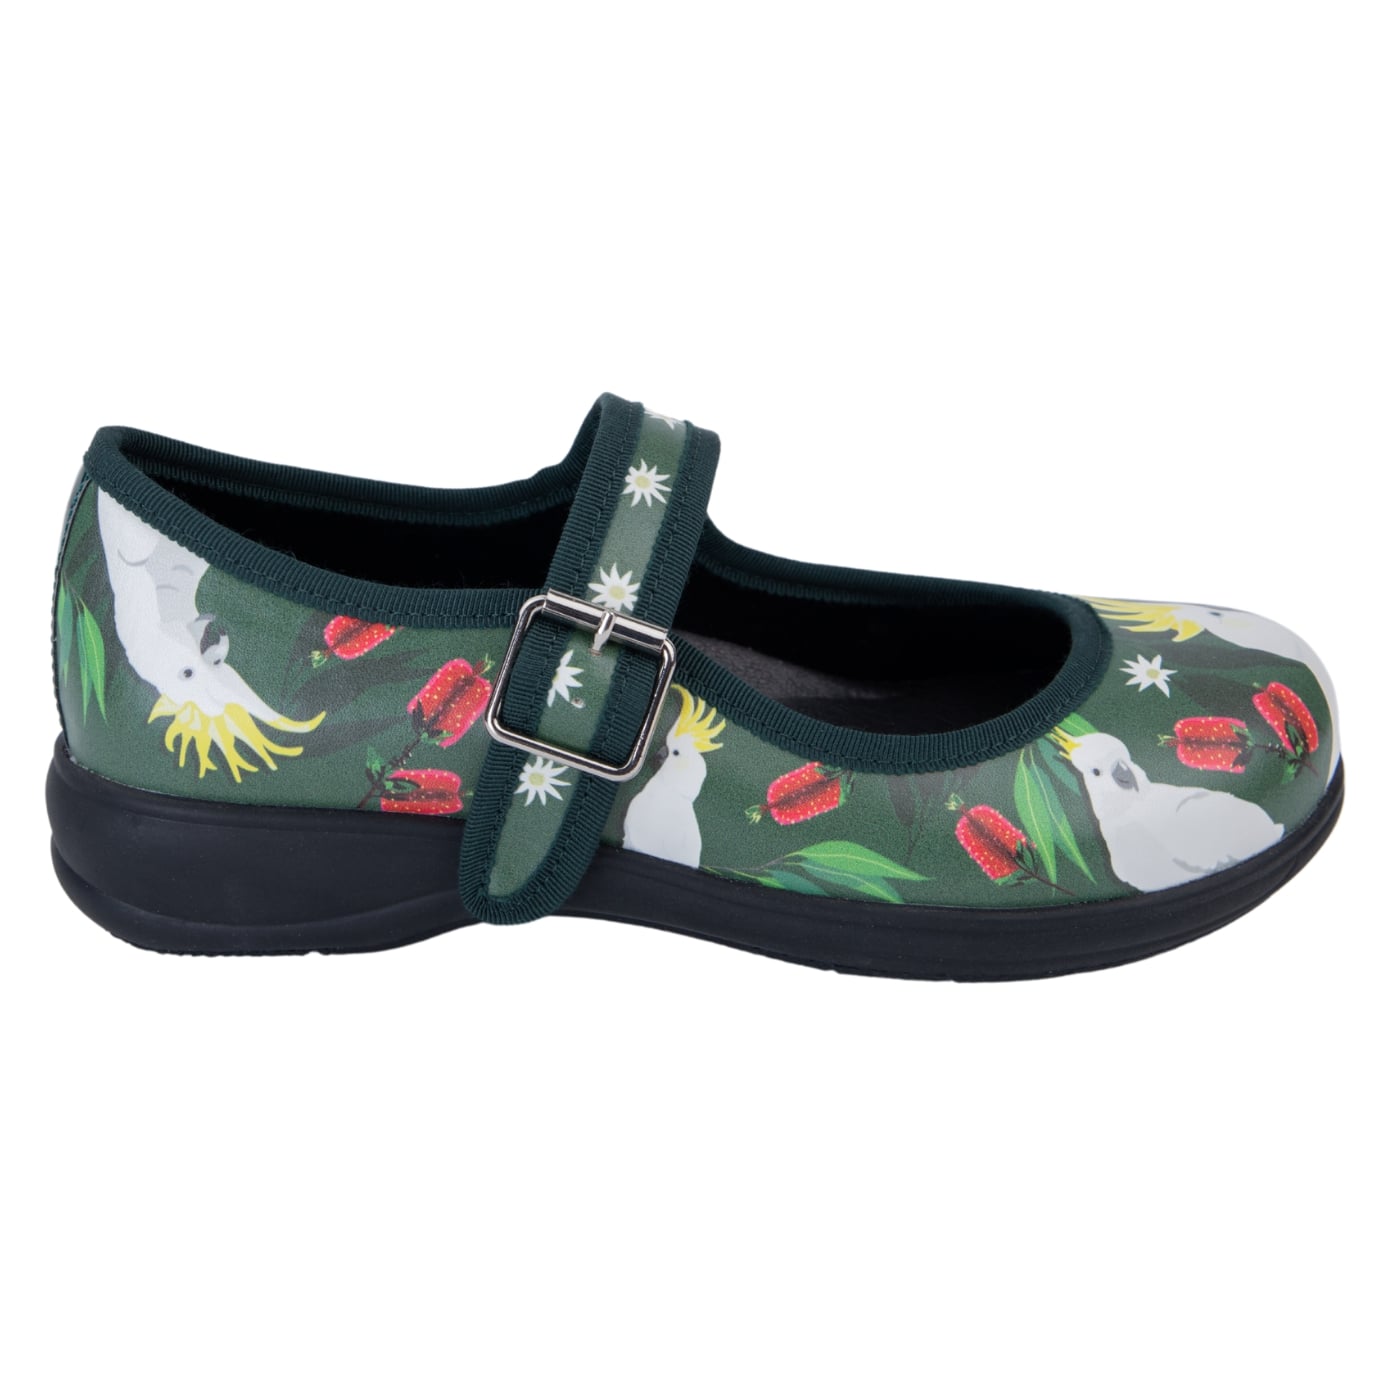 Polly Mary Janes by RainbowsAndFairies.com.au (Cockatoo - Galah - Mismatched Shoes - Cute & Comfy - Buckle Up Shoes - Native Flowers - Australian) - SKU: FW_MARYJ_POLLY_ORG - Pic-04